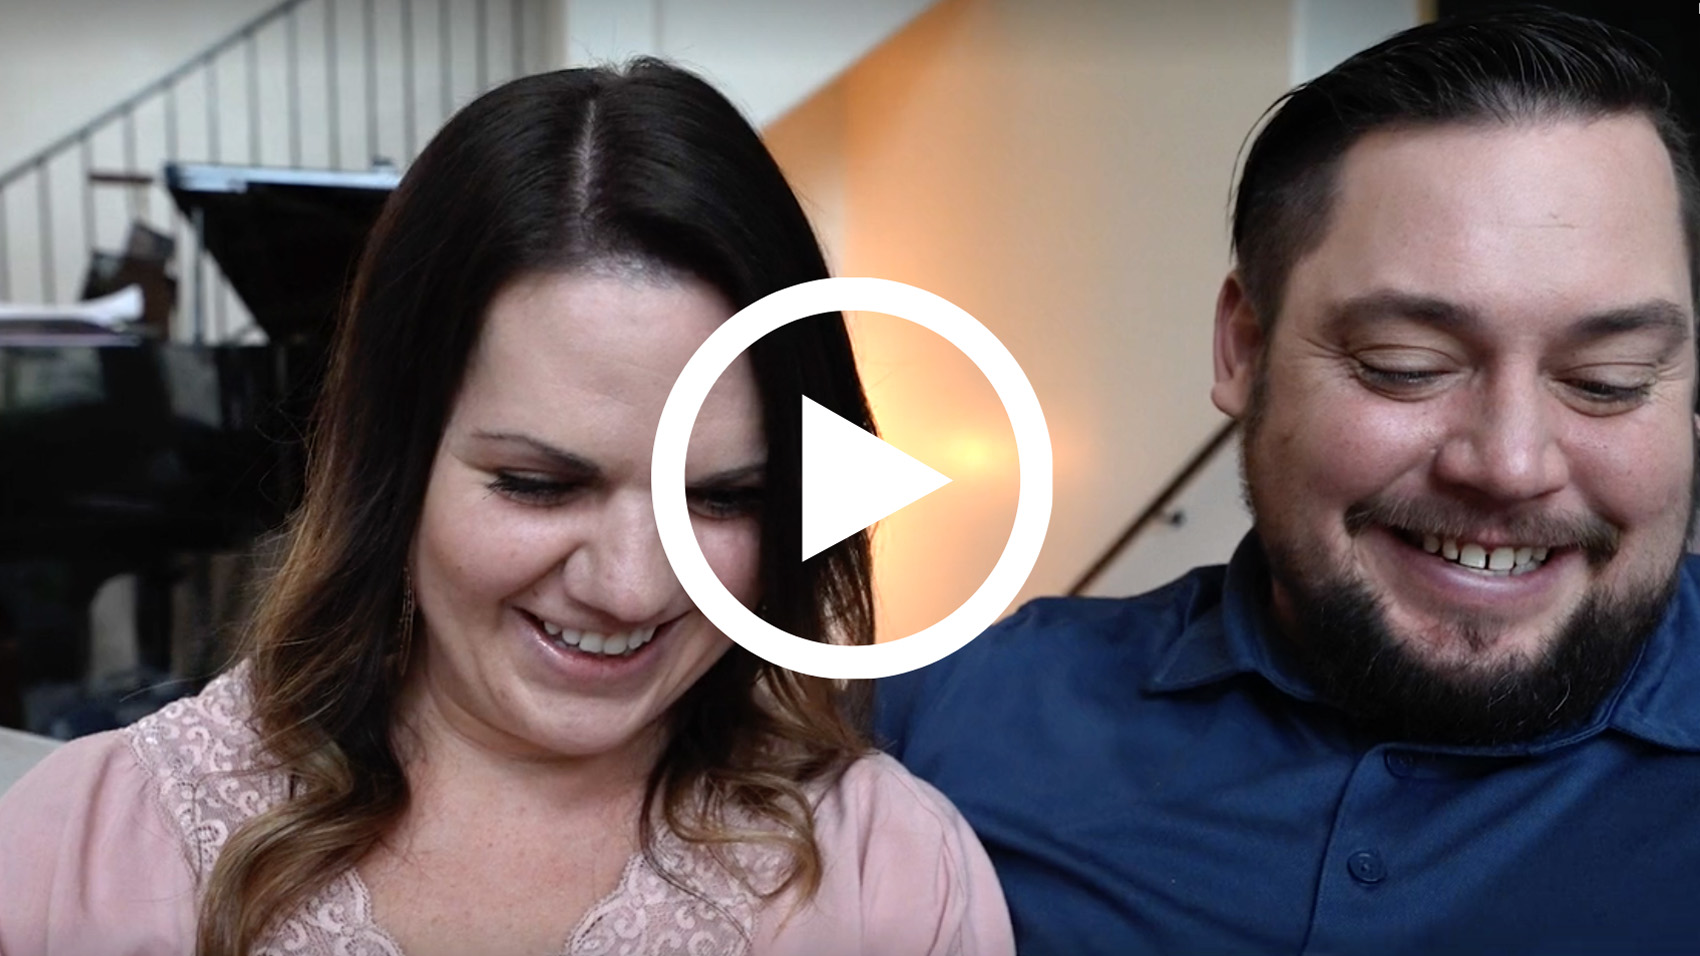 Watch a couple share their RAVICTI story.